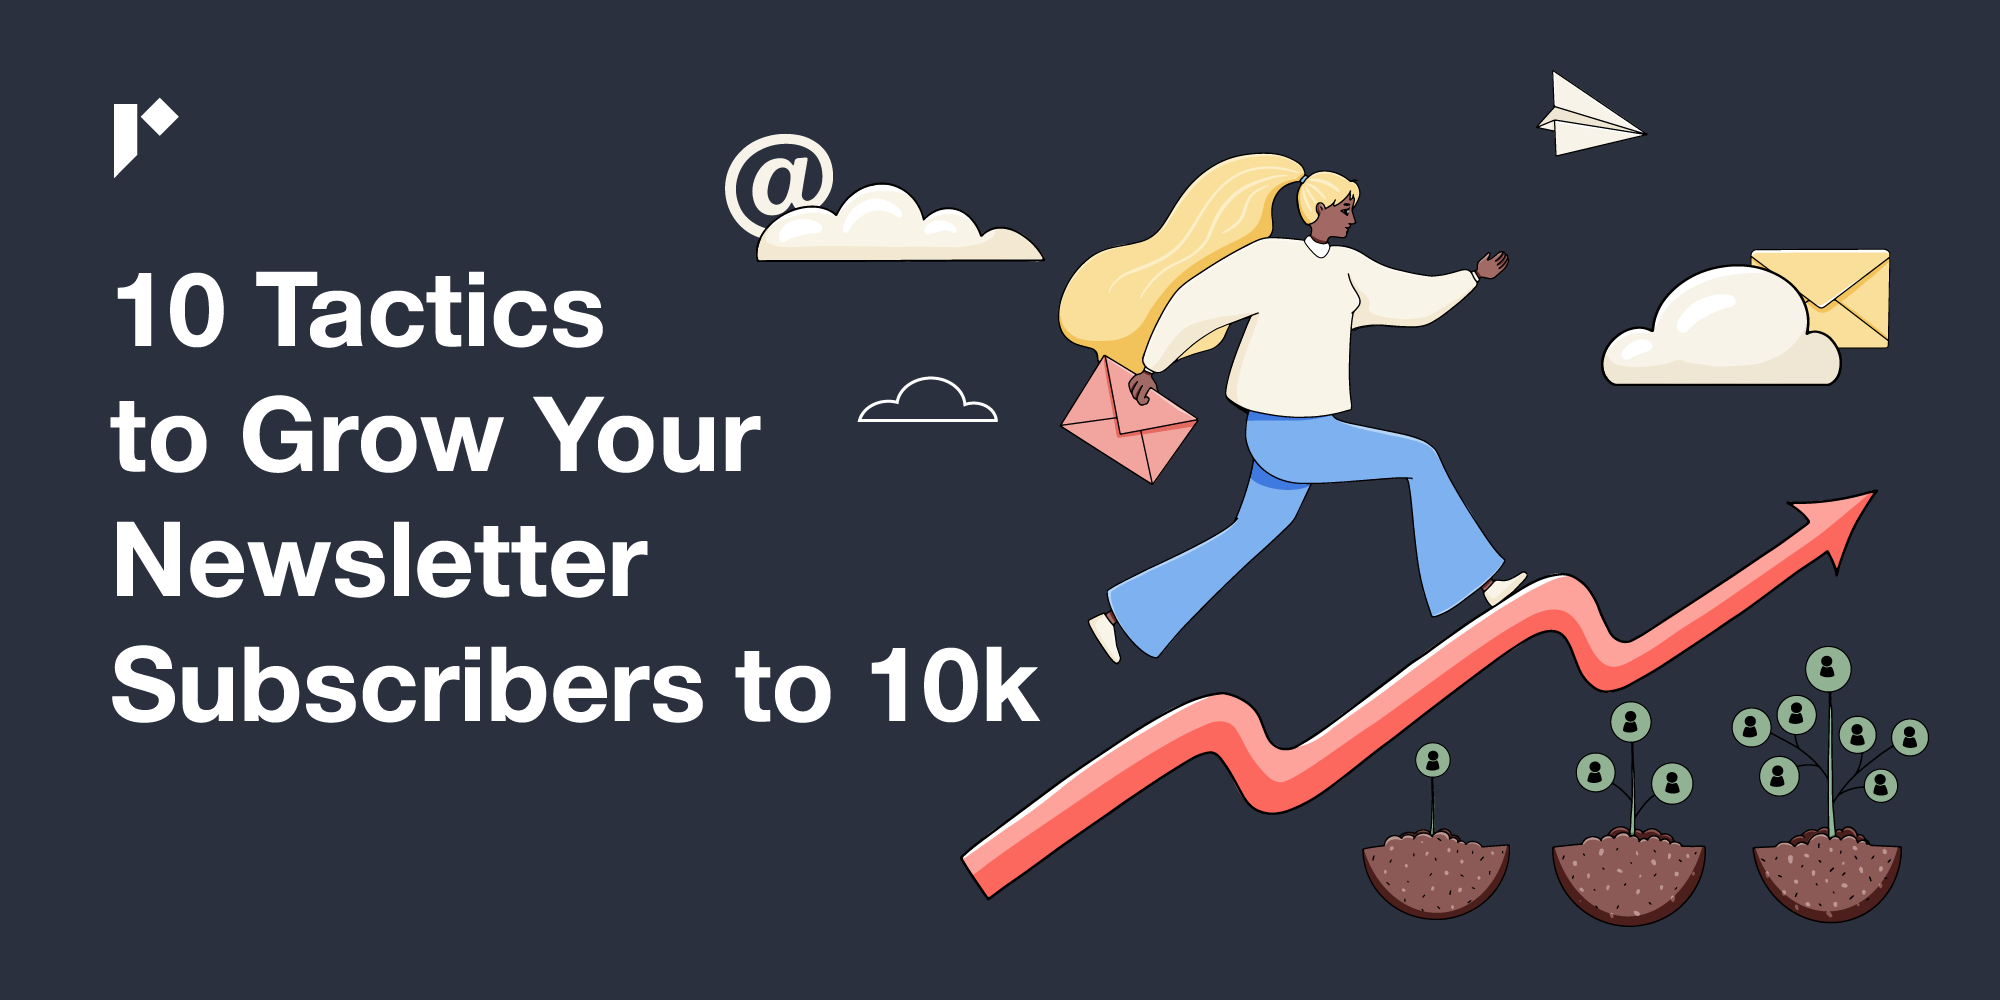 10 Tactics to Grow Your Newsletter Subscribers to 10k